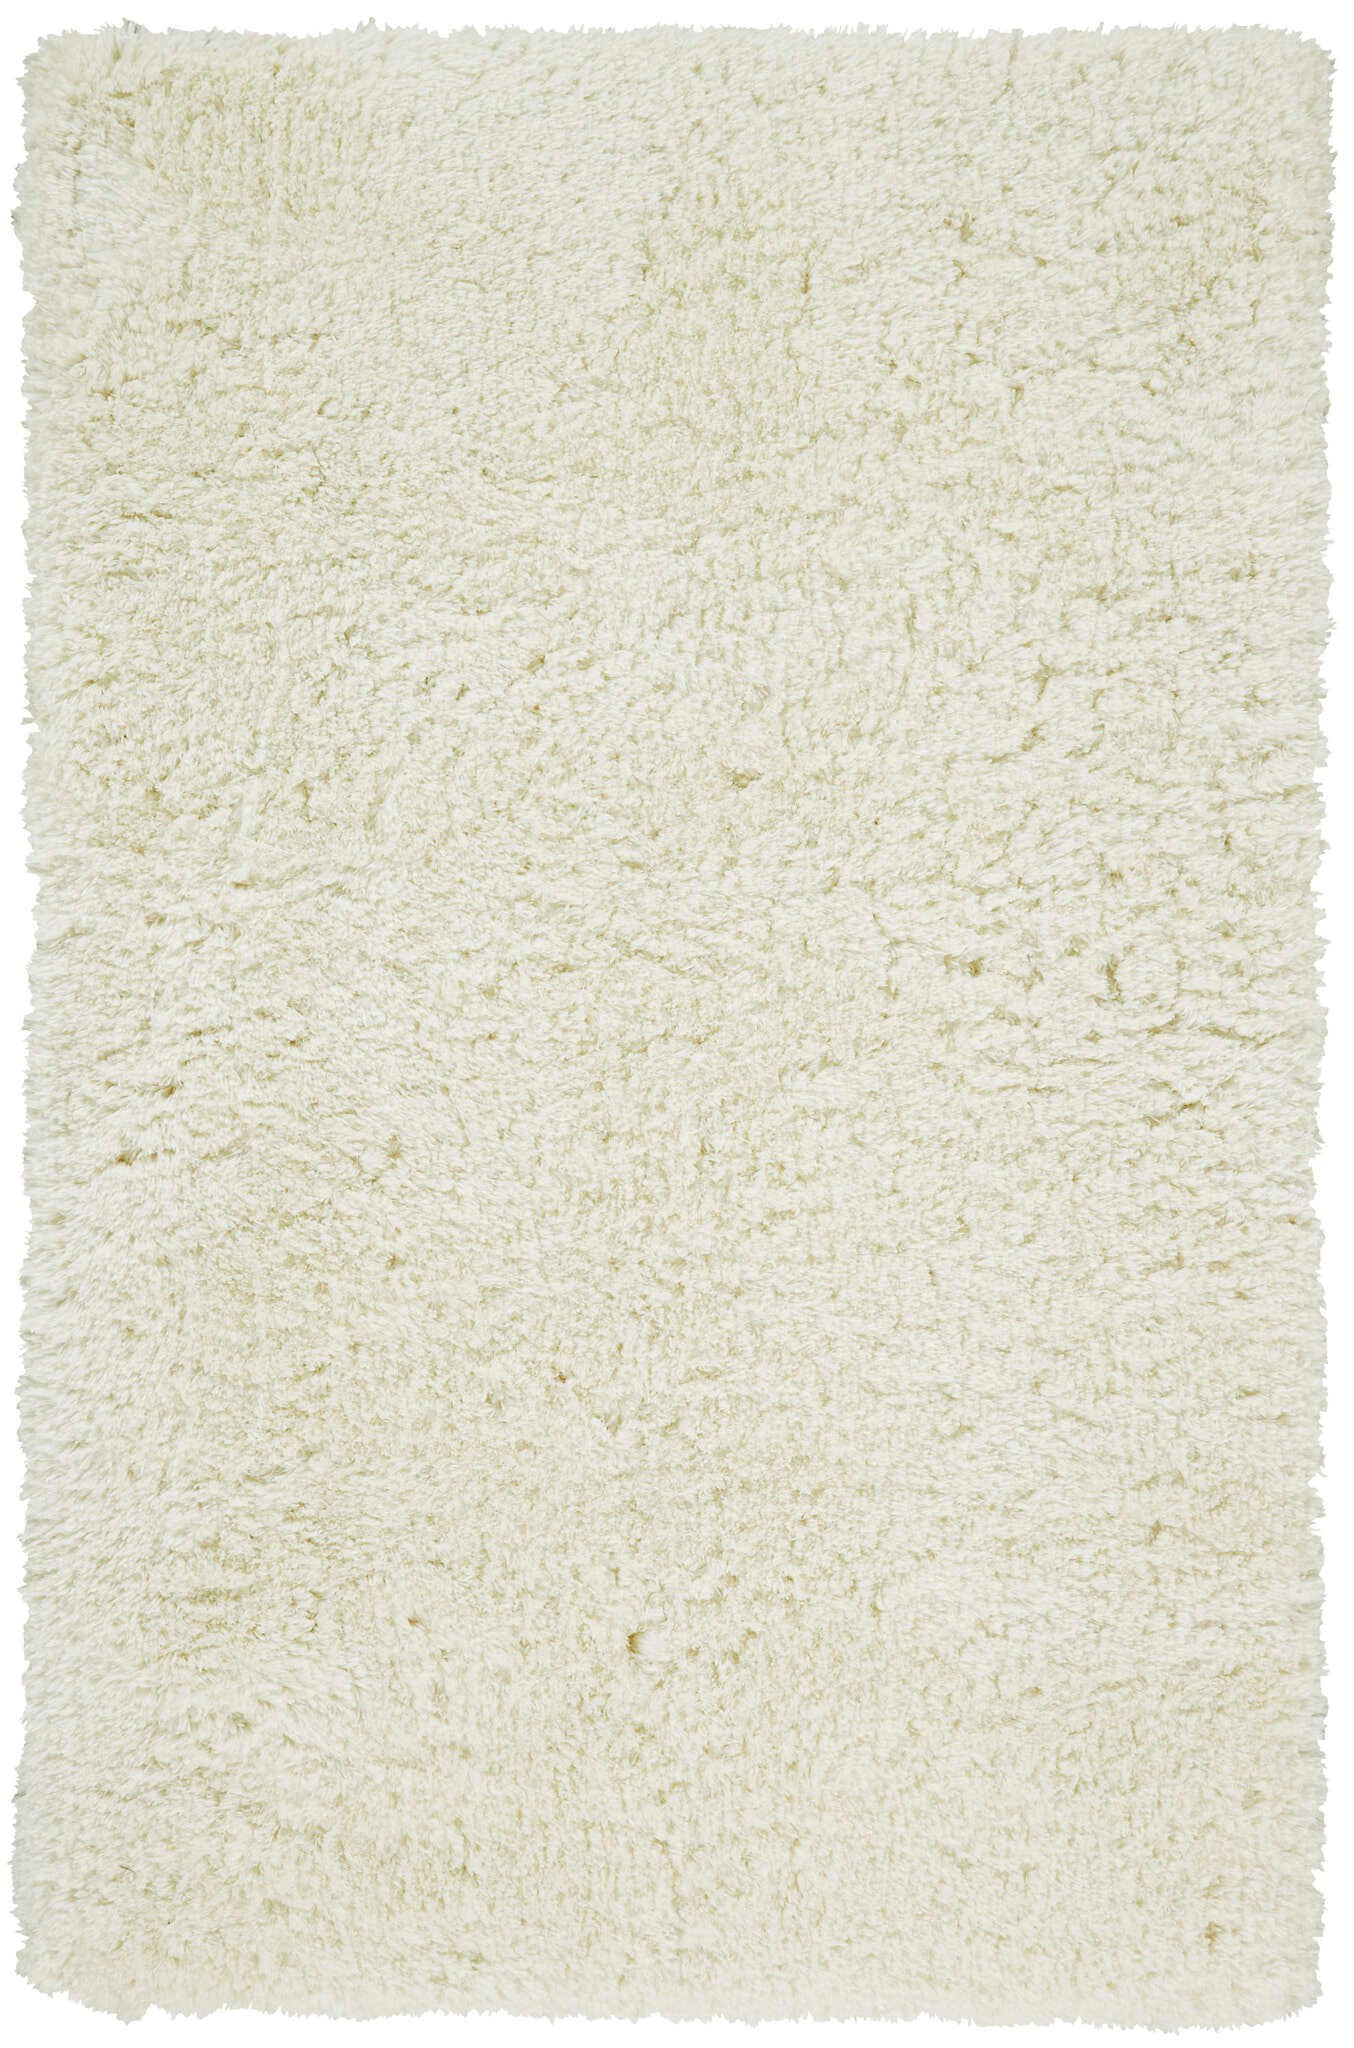 10' X 13' Ivory And White Shag Tufted Handmade Stain Resistant Area Rug-511132-1